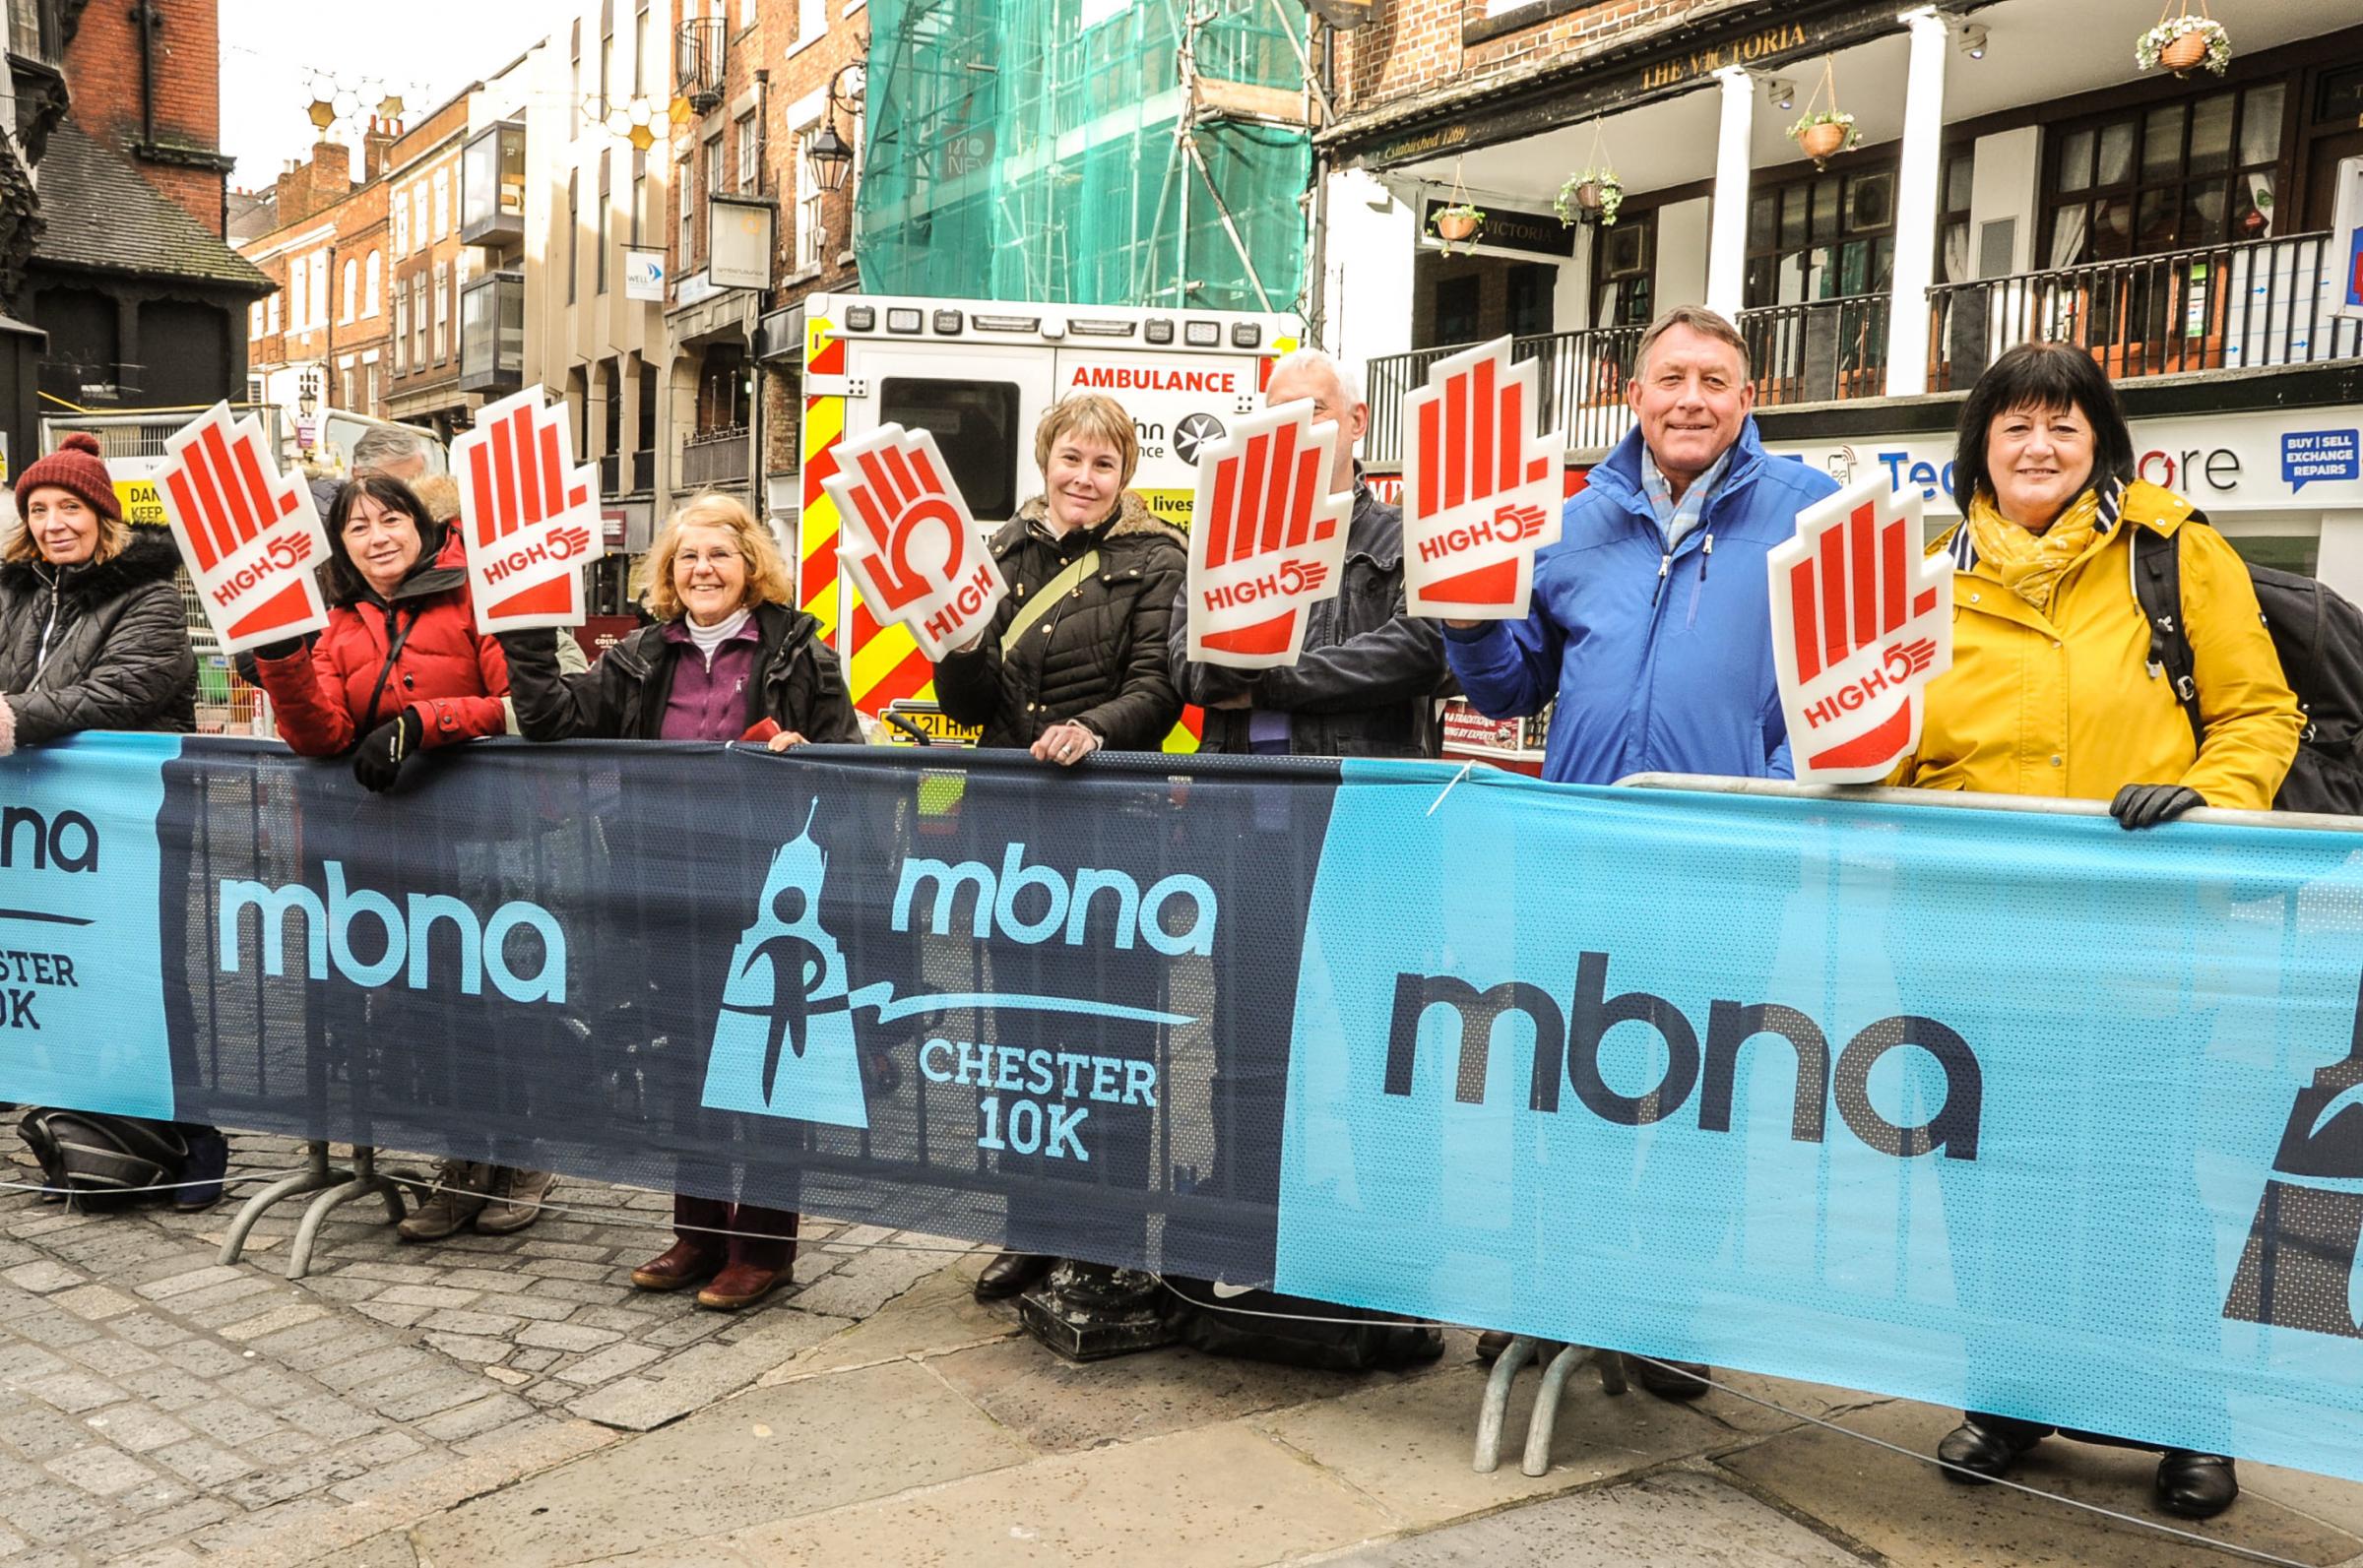 MBNA Chester 10K Race, Picture Crowds cheer the runners. SW13032022.